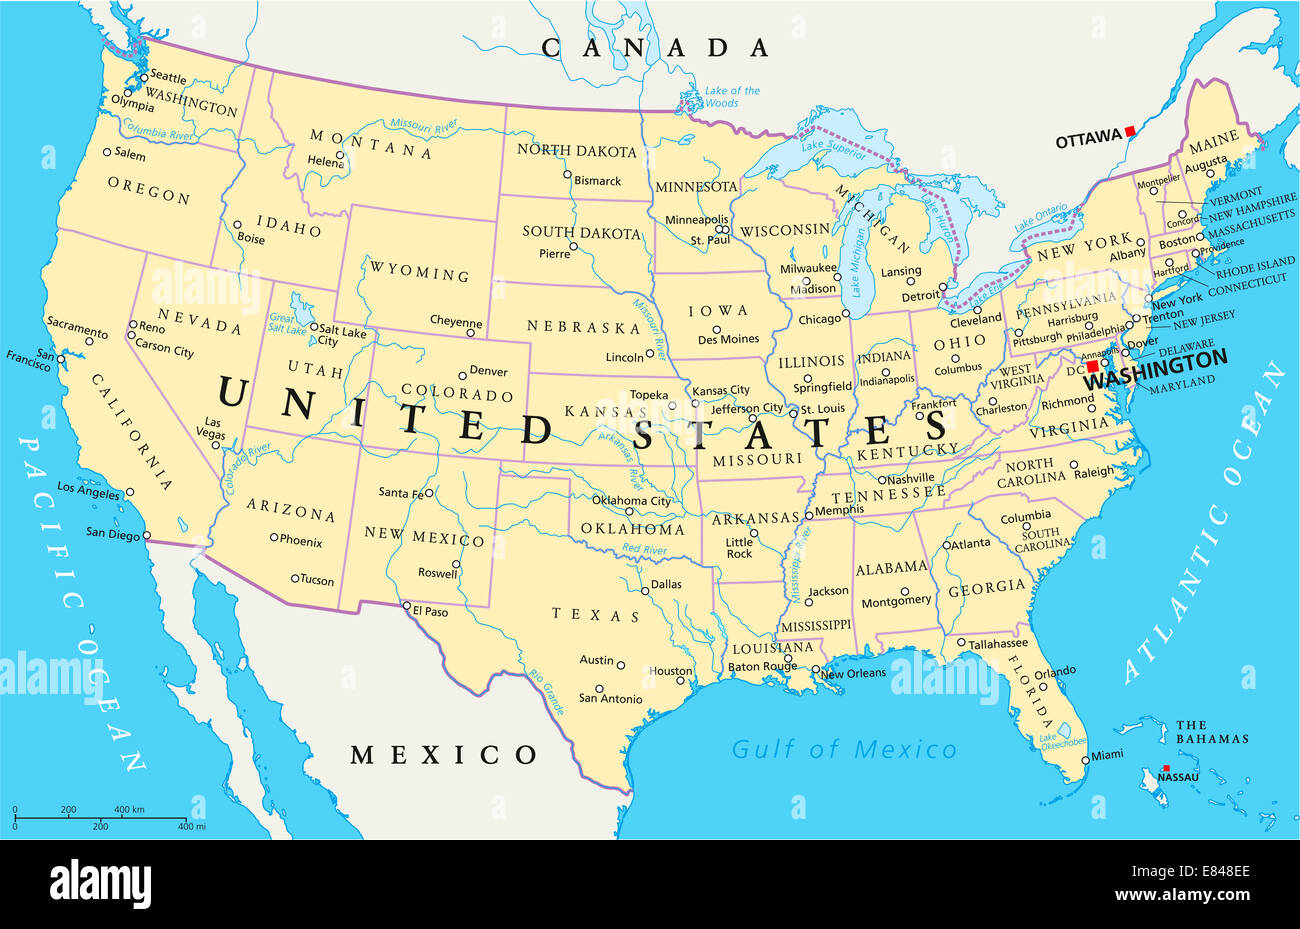 United States of America Political Map Stock Photo